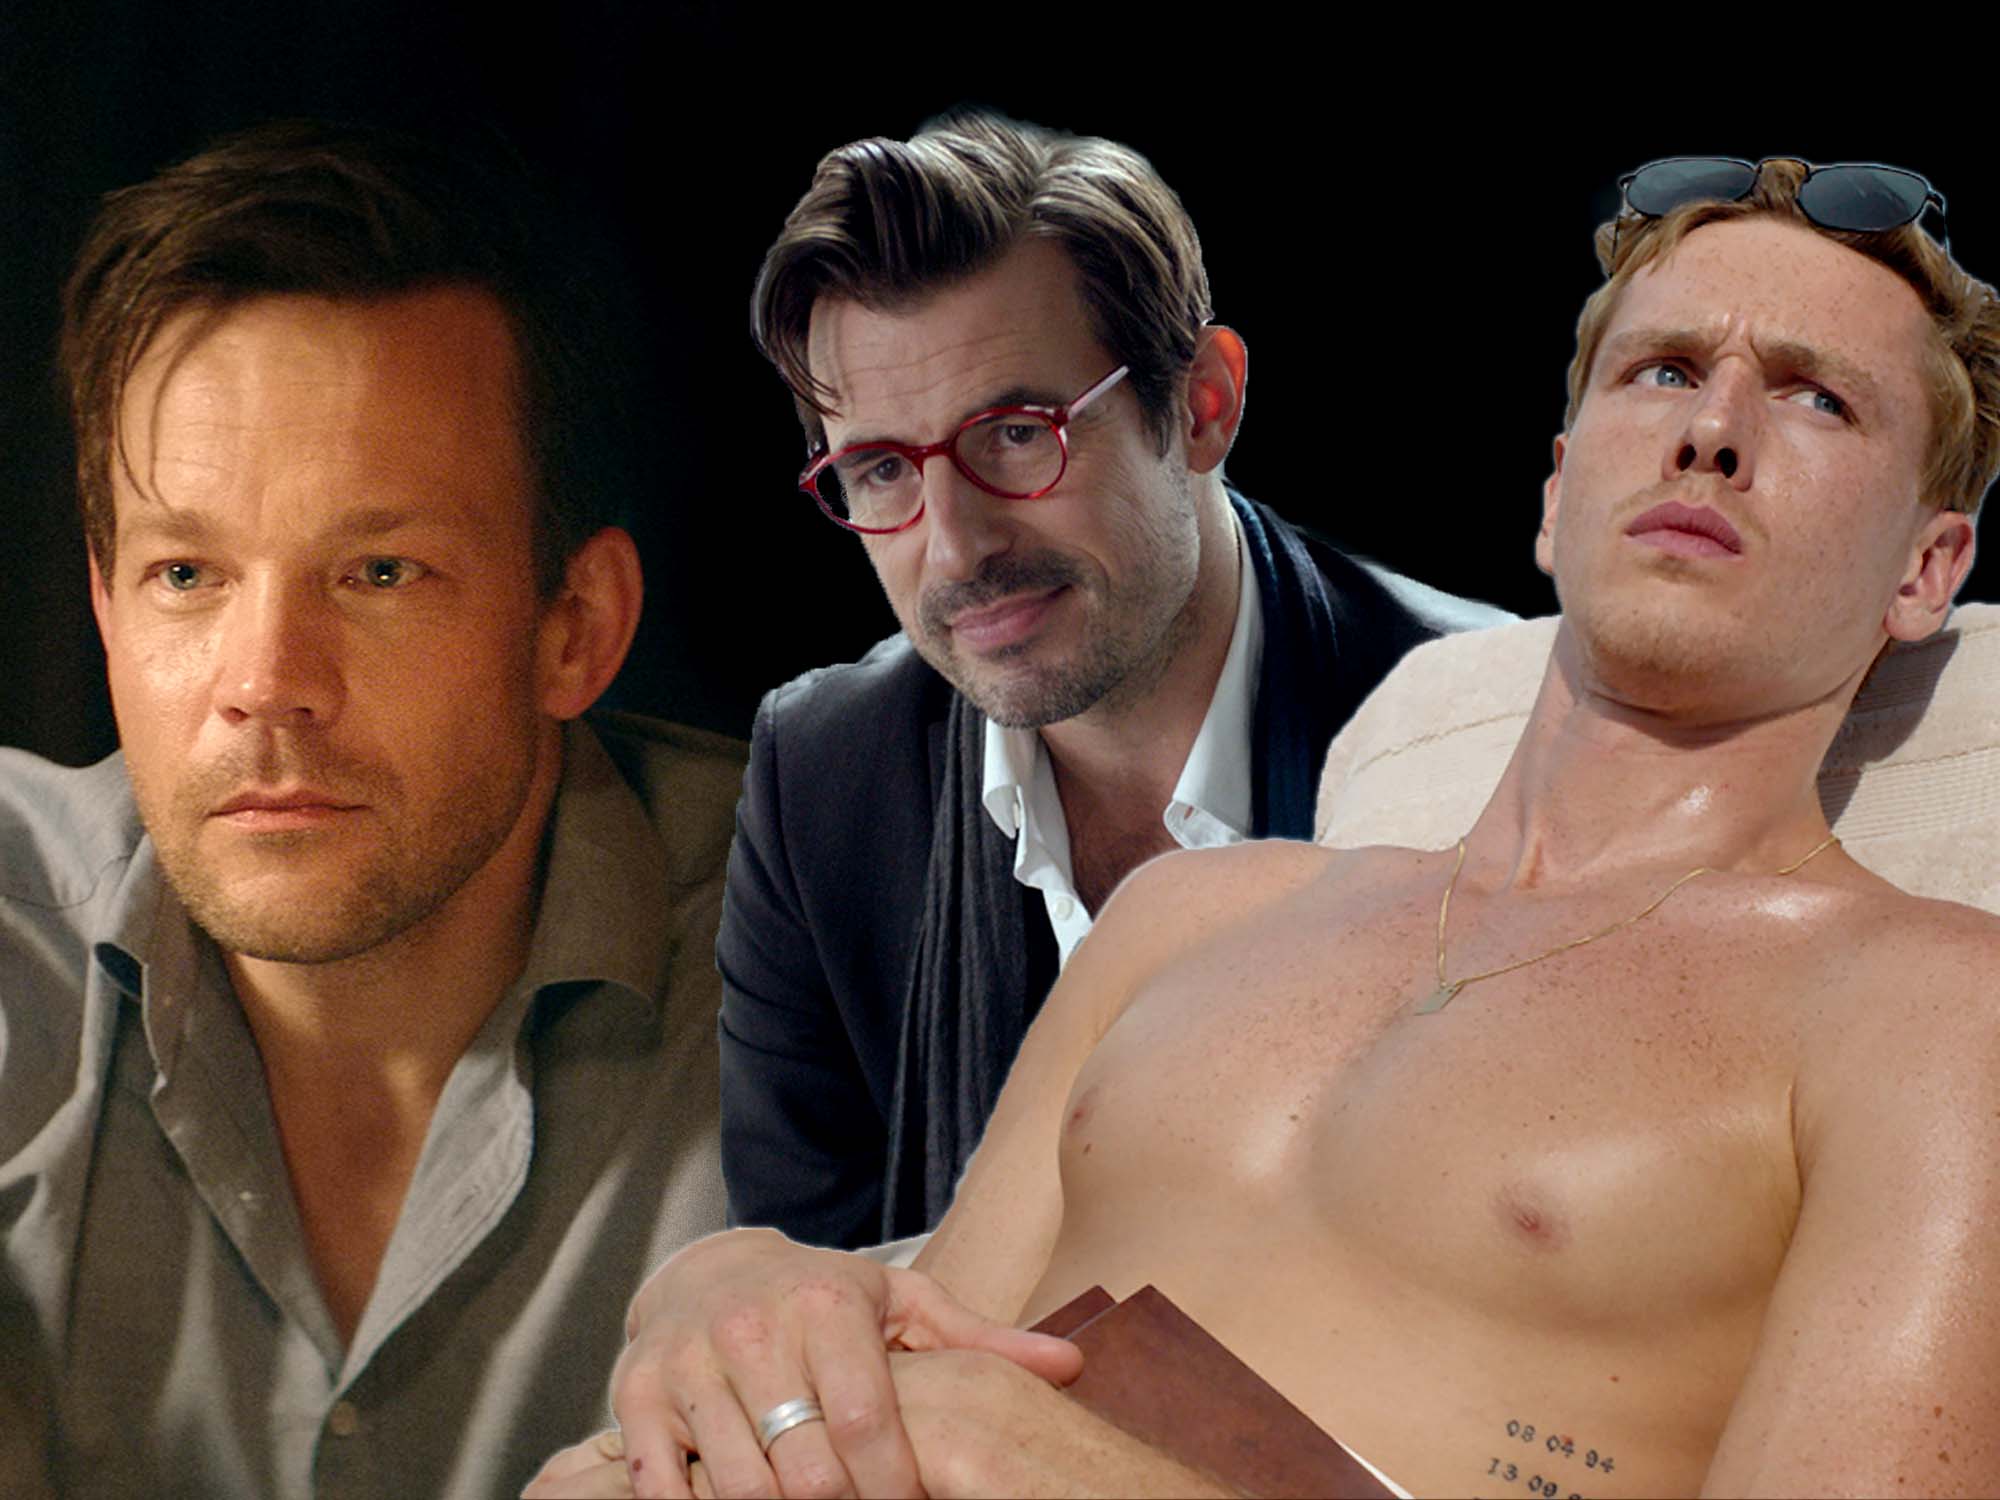 The male characters in the films of Ruben Östlund